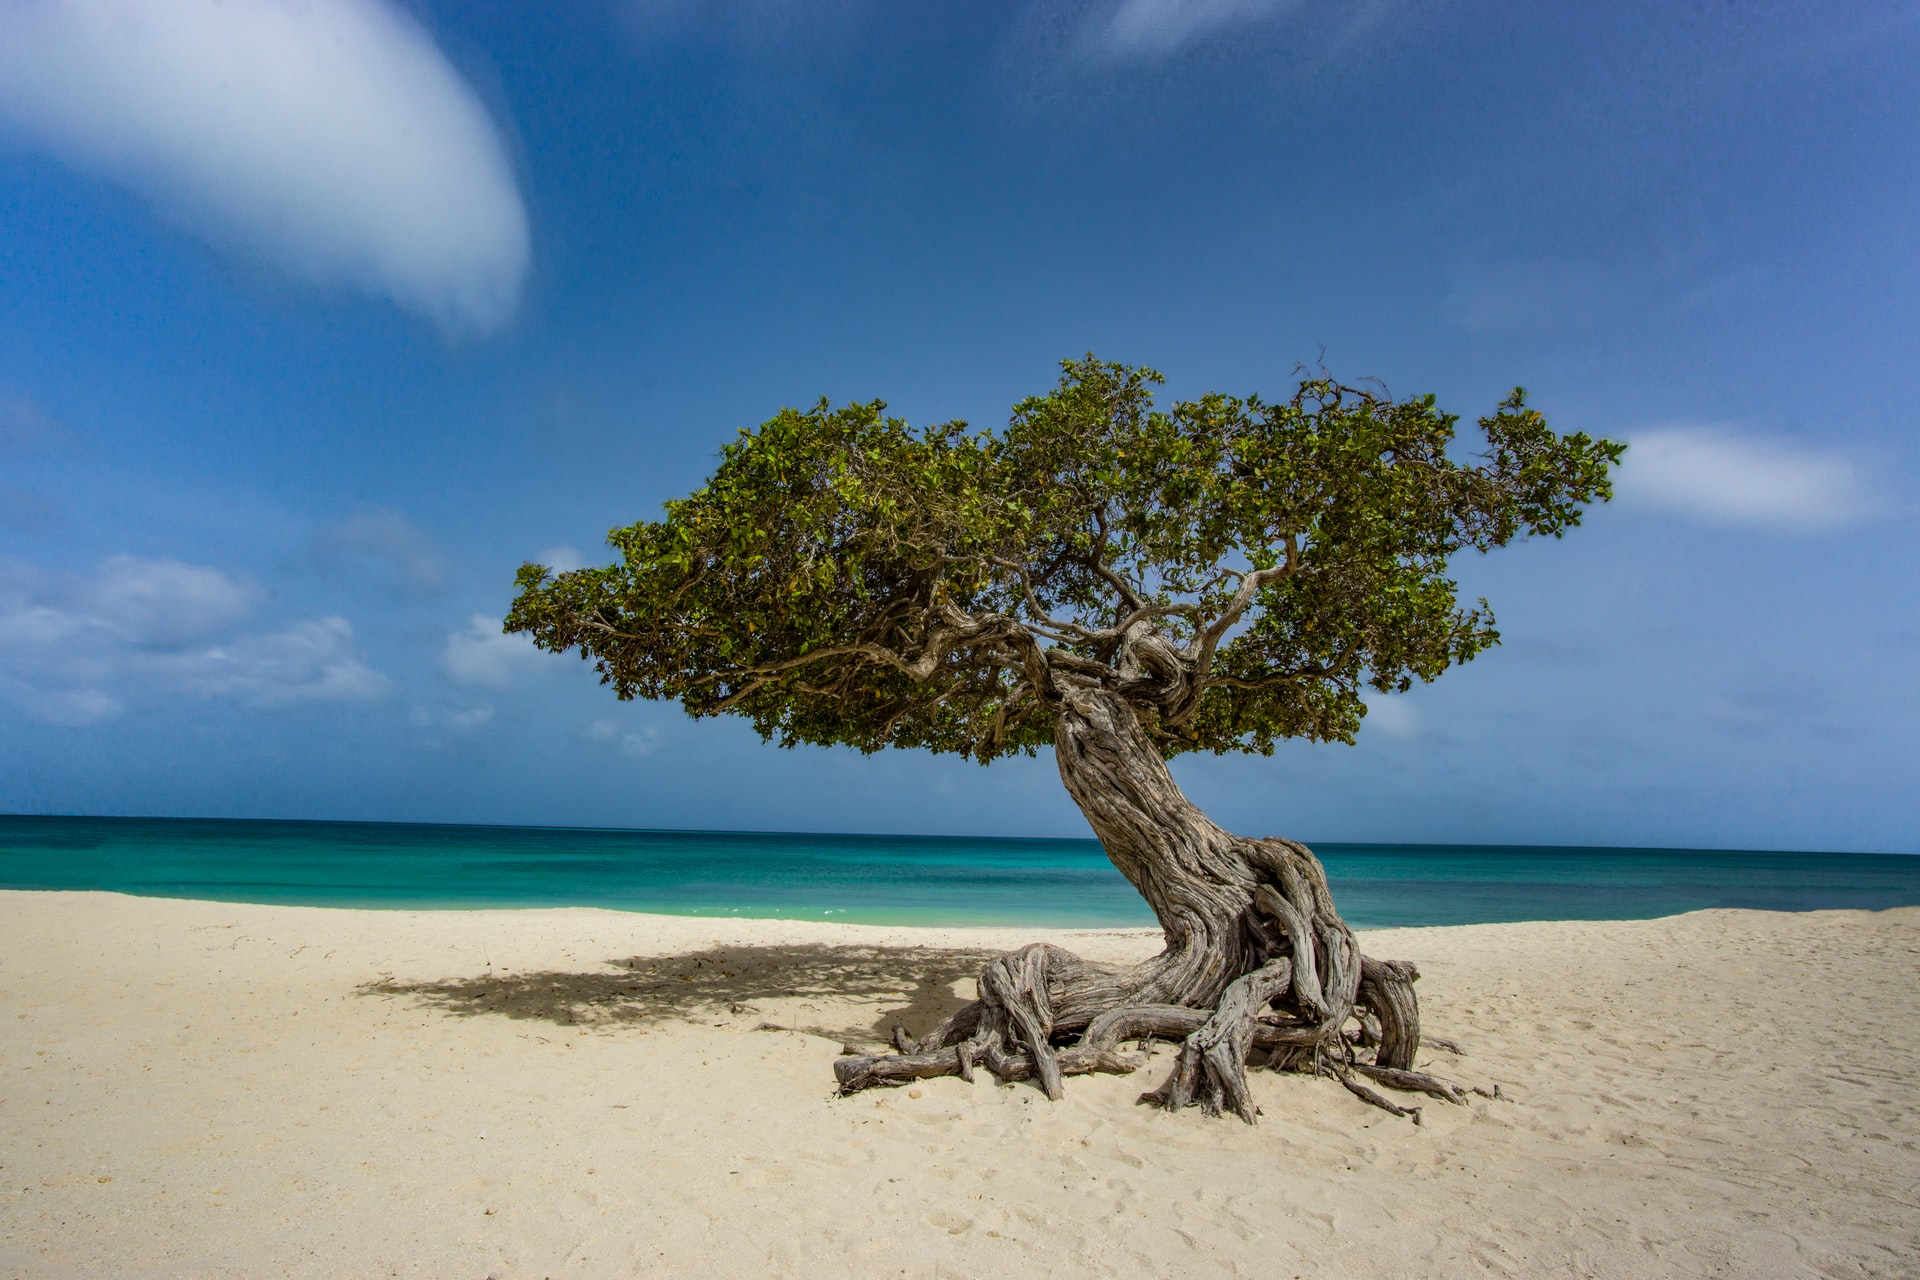 Aruba,10 best countries to visit in south america